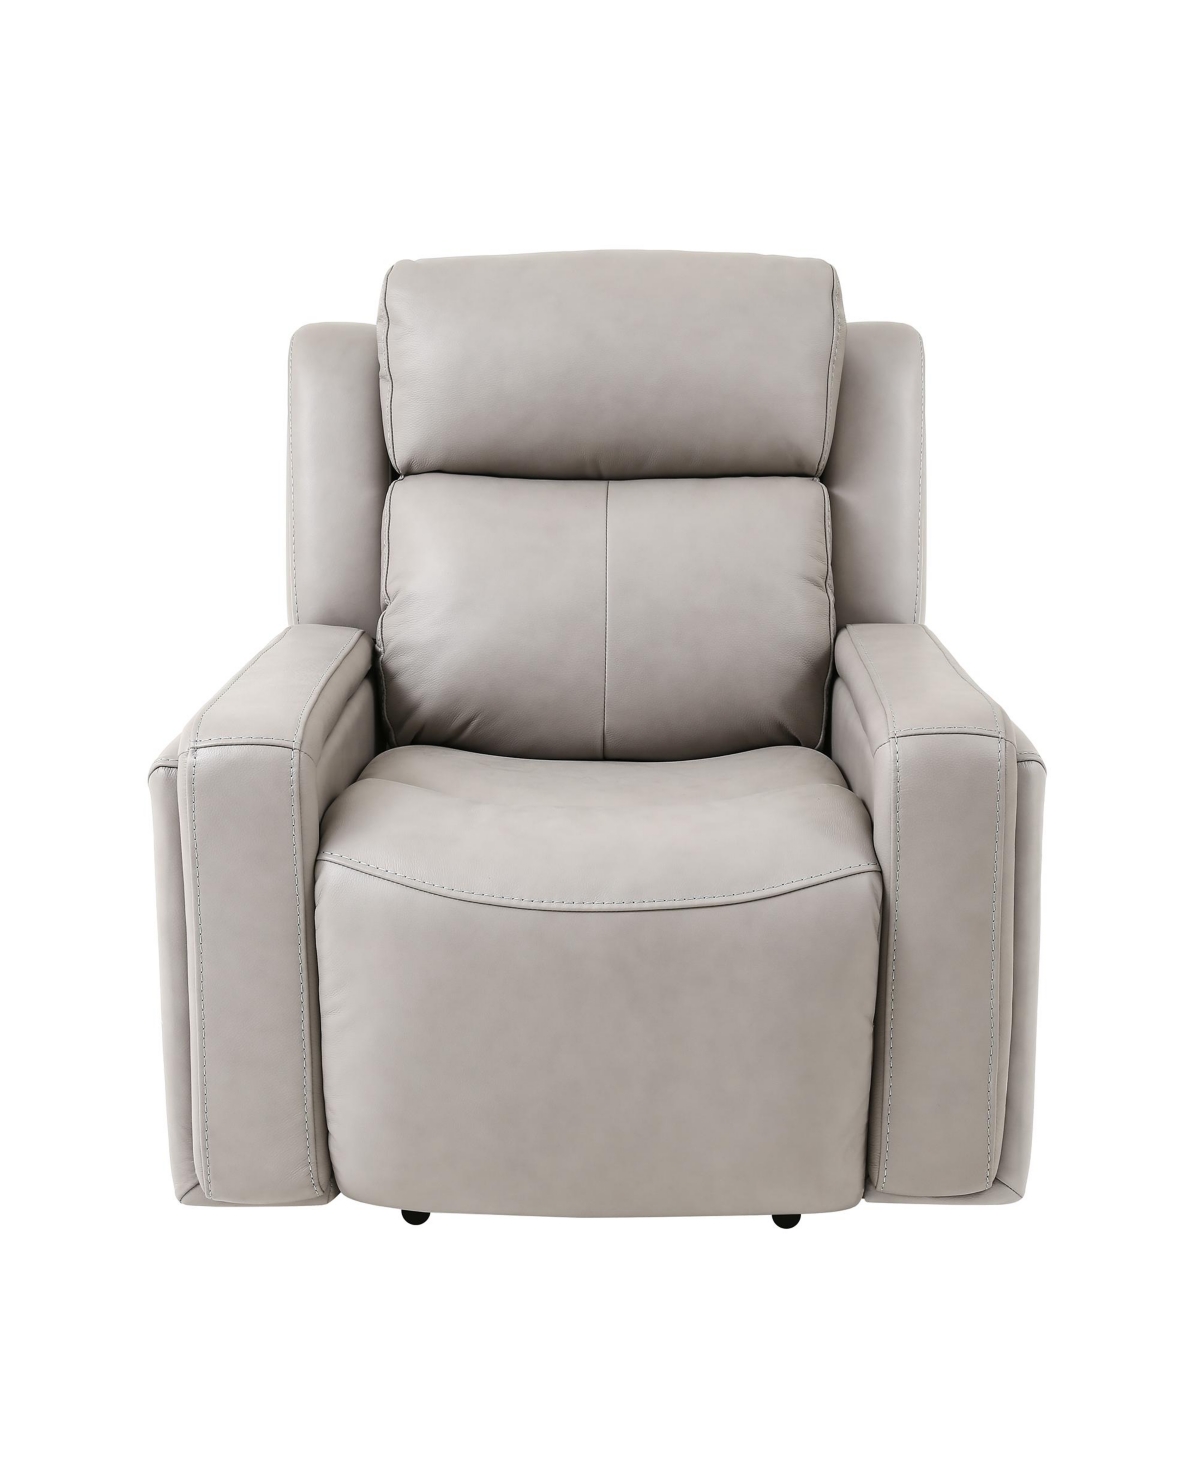 Shop Armen Living Claude 37" Genuine Leather In Dual Power Headrest And Lumbar Support Recliner Chair In Light Gray